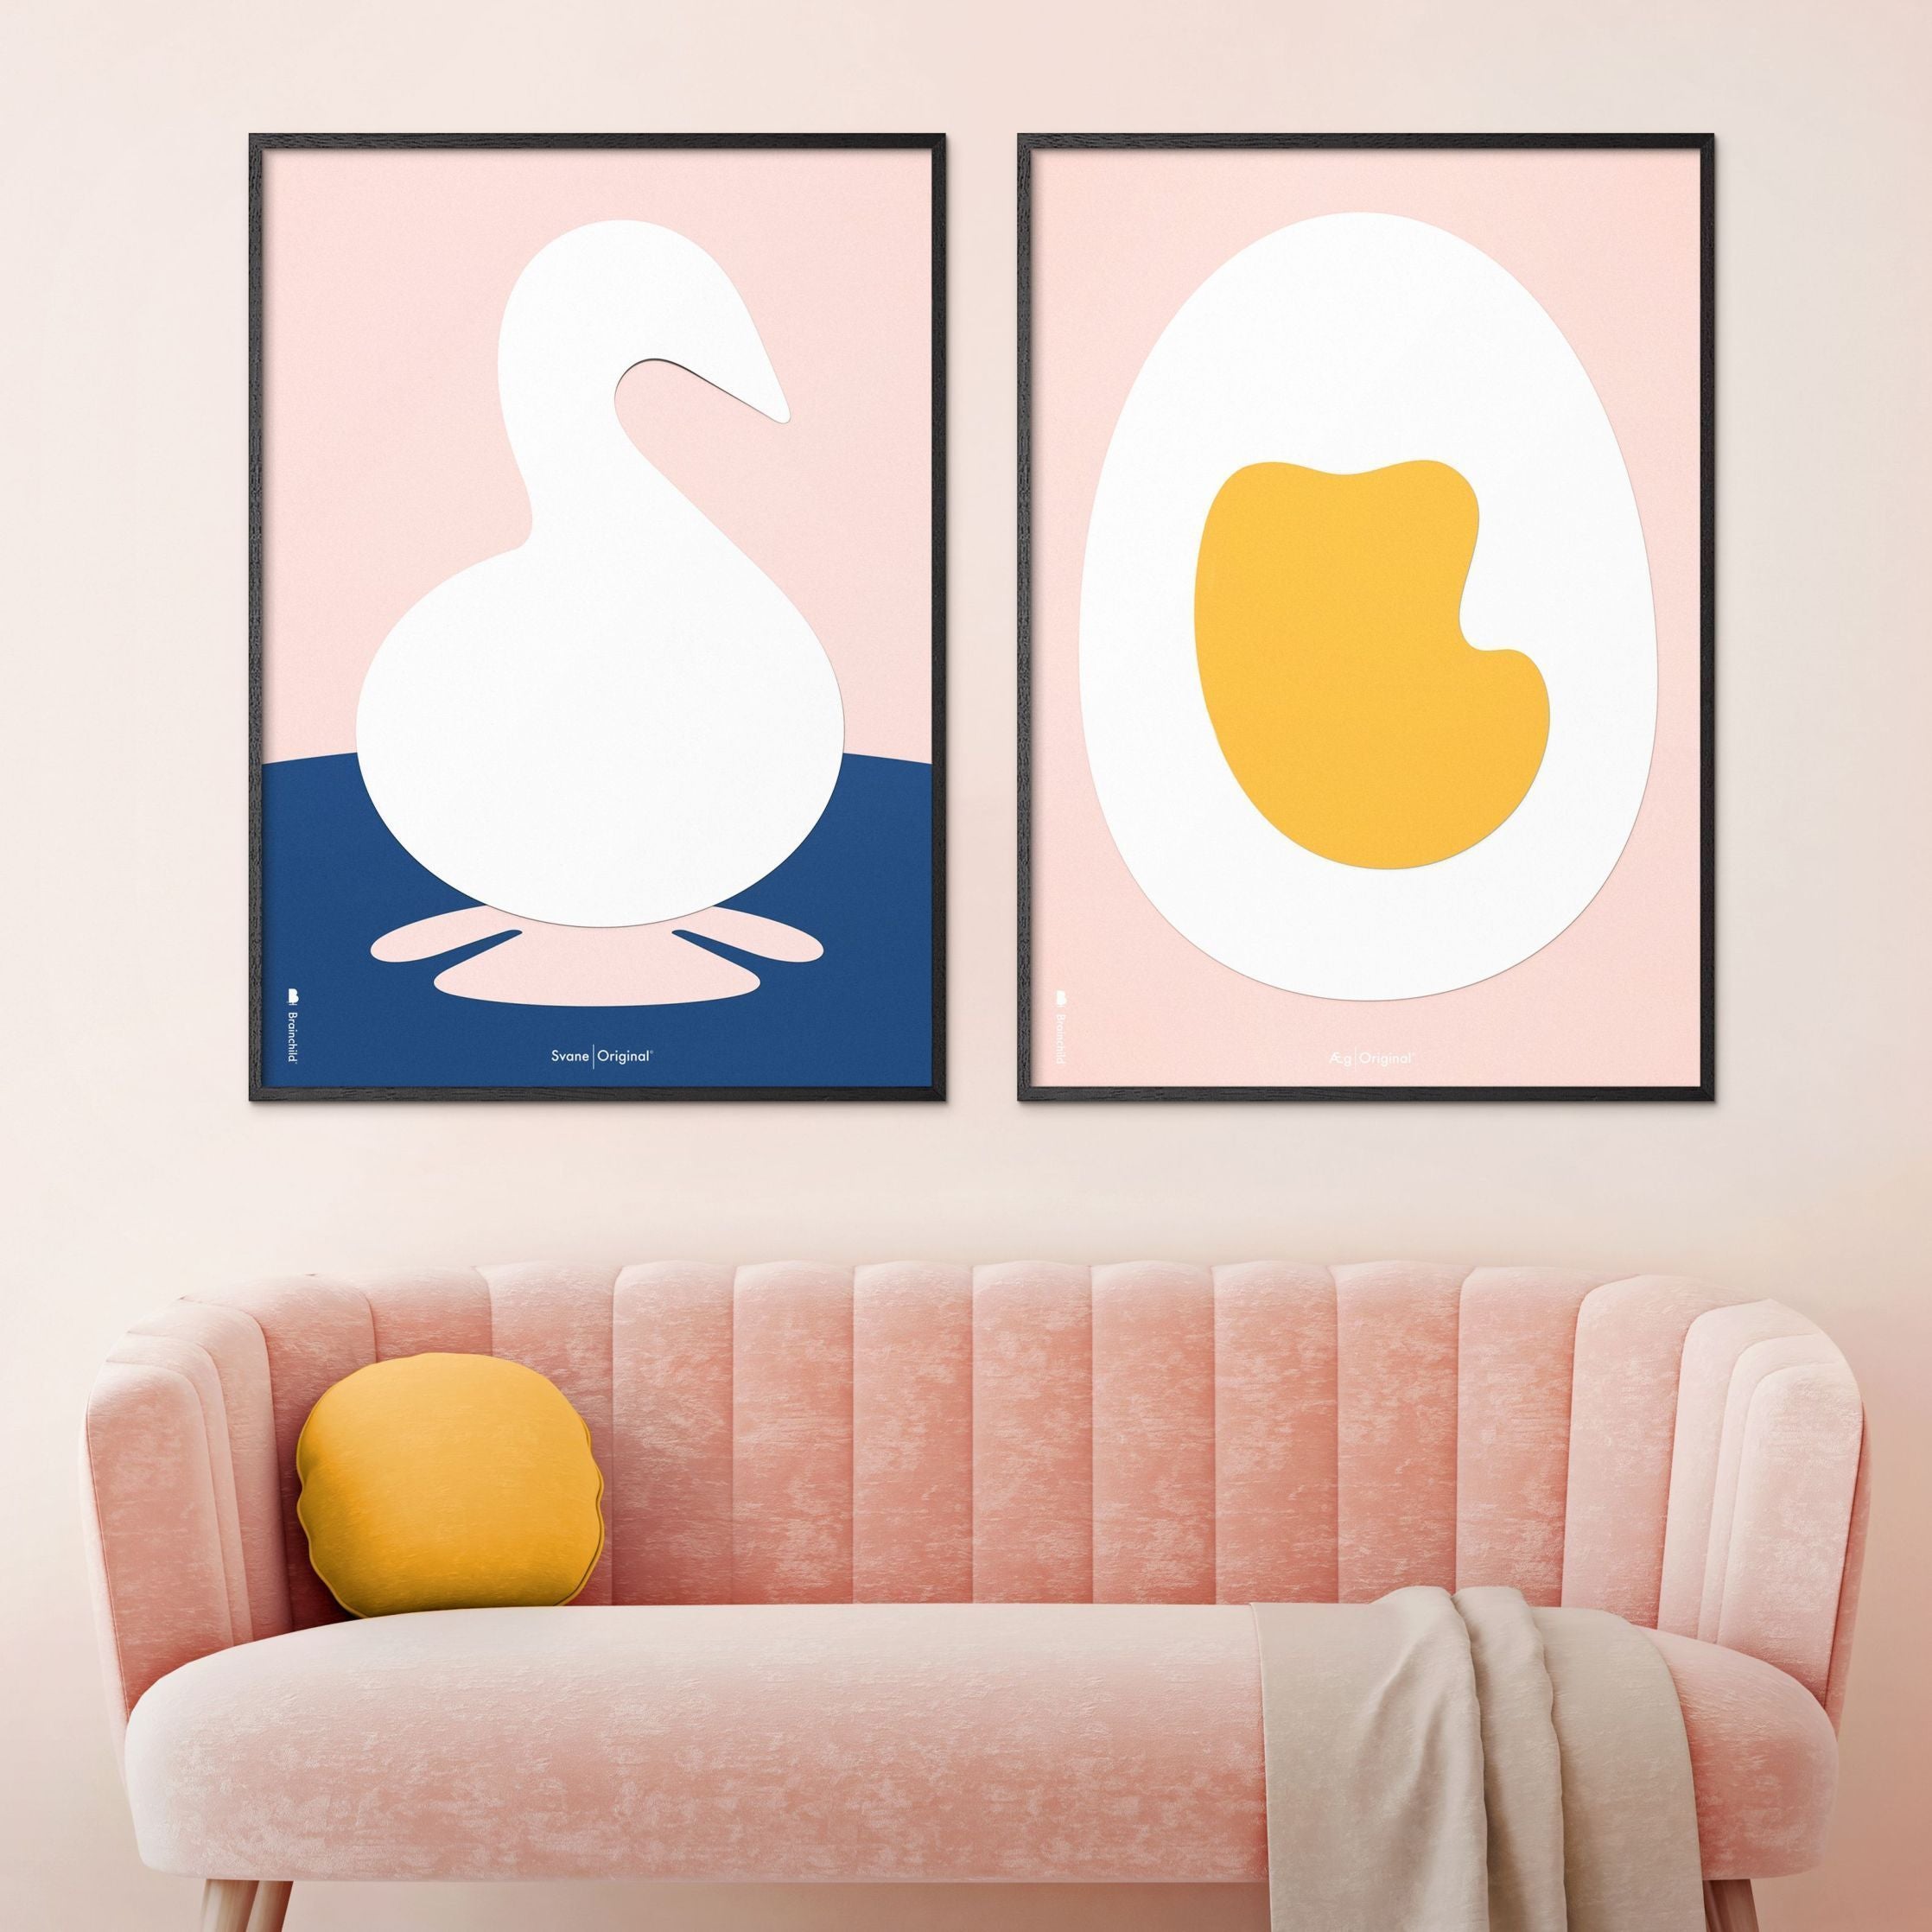 Brainchild Swan Paper Clip Poster, Frame In Black Lacquered Wood 70x100 Cm, Pink Background